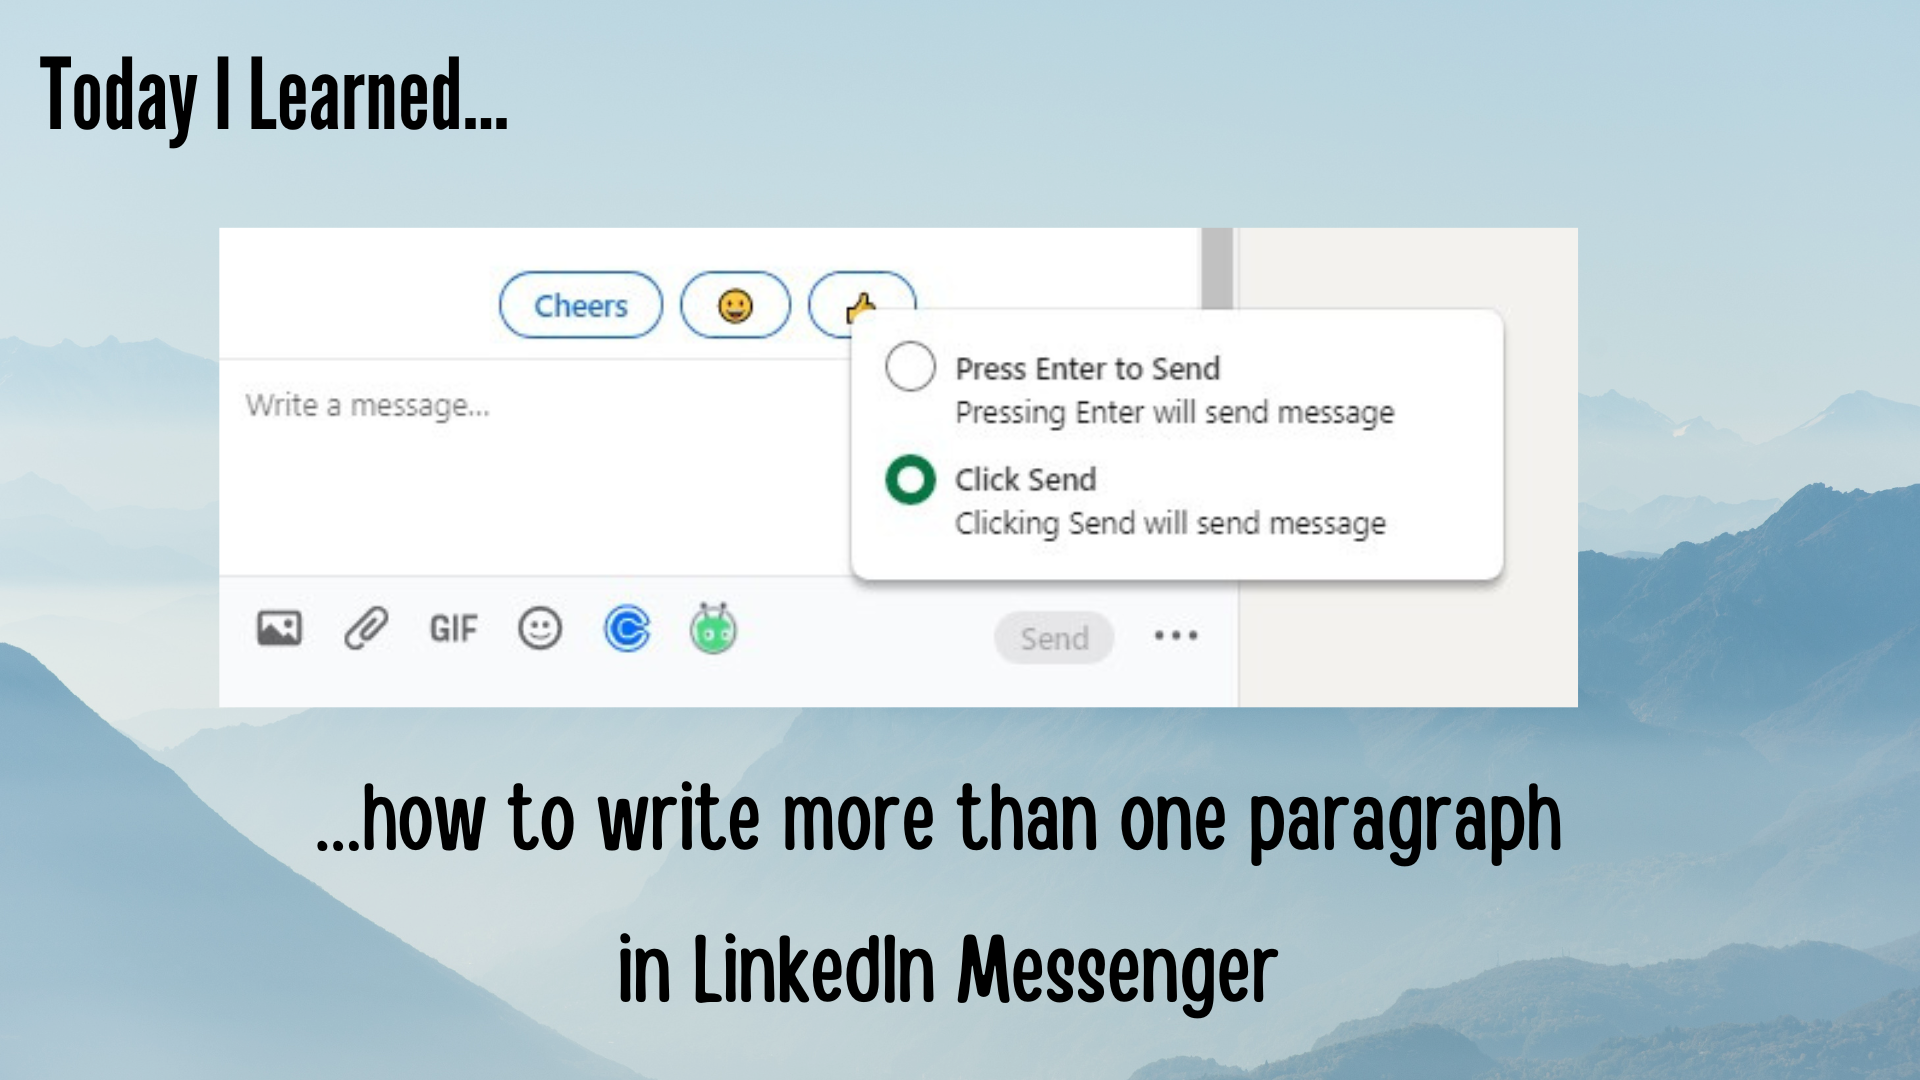 How to Write More than One Paragraph in LinkedIn Messenger